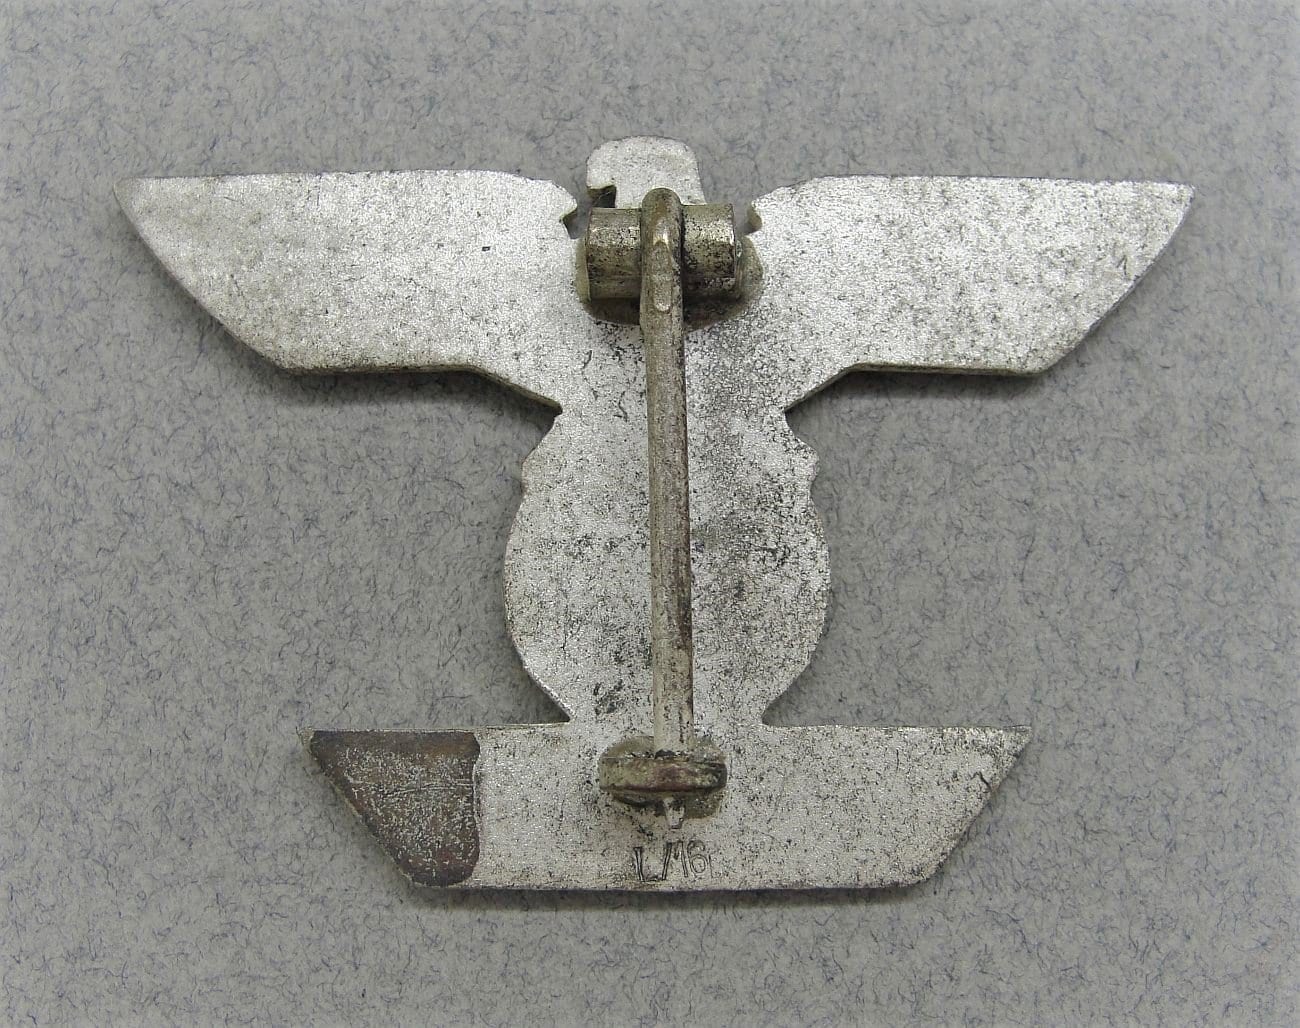 1939 Spange to Iron Cross, First Class by "L/16", S & L